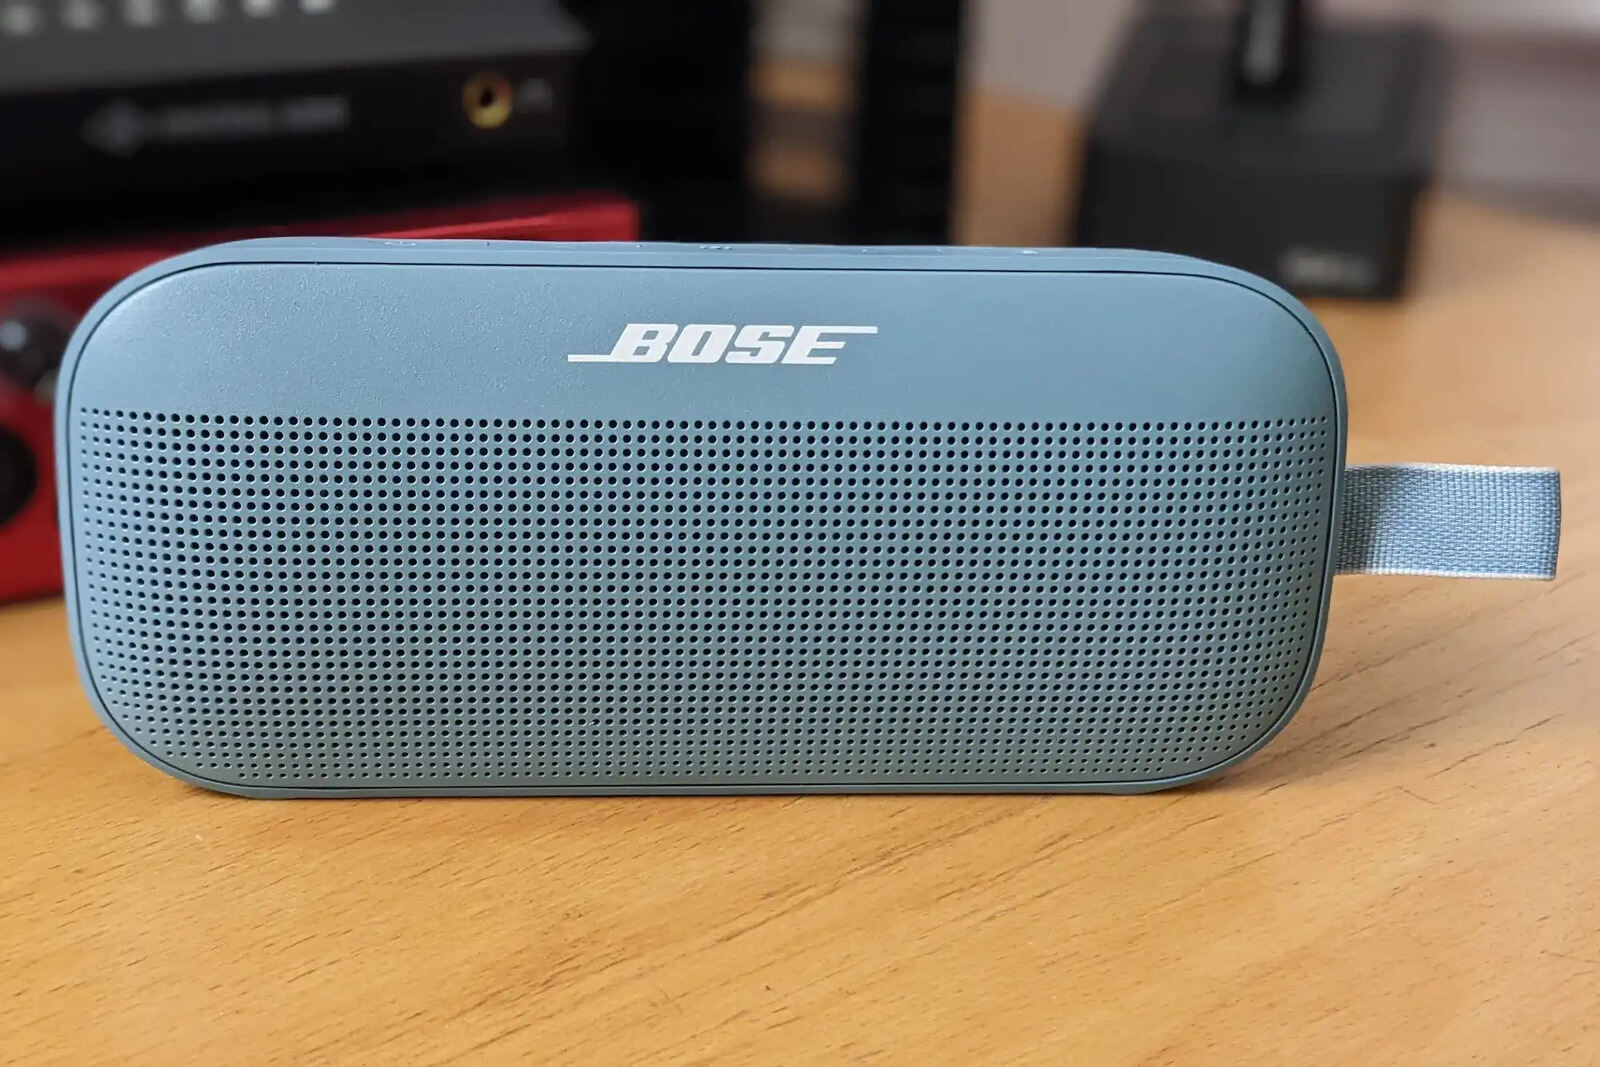 Connecting Your Phone To A Bose Speaker: Setup Instructions